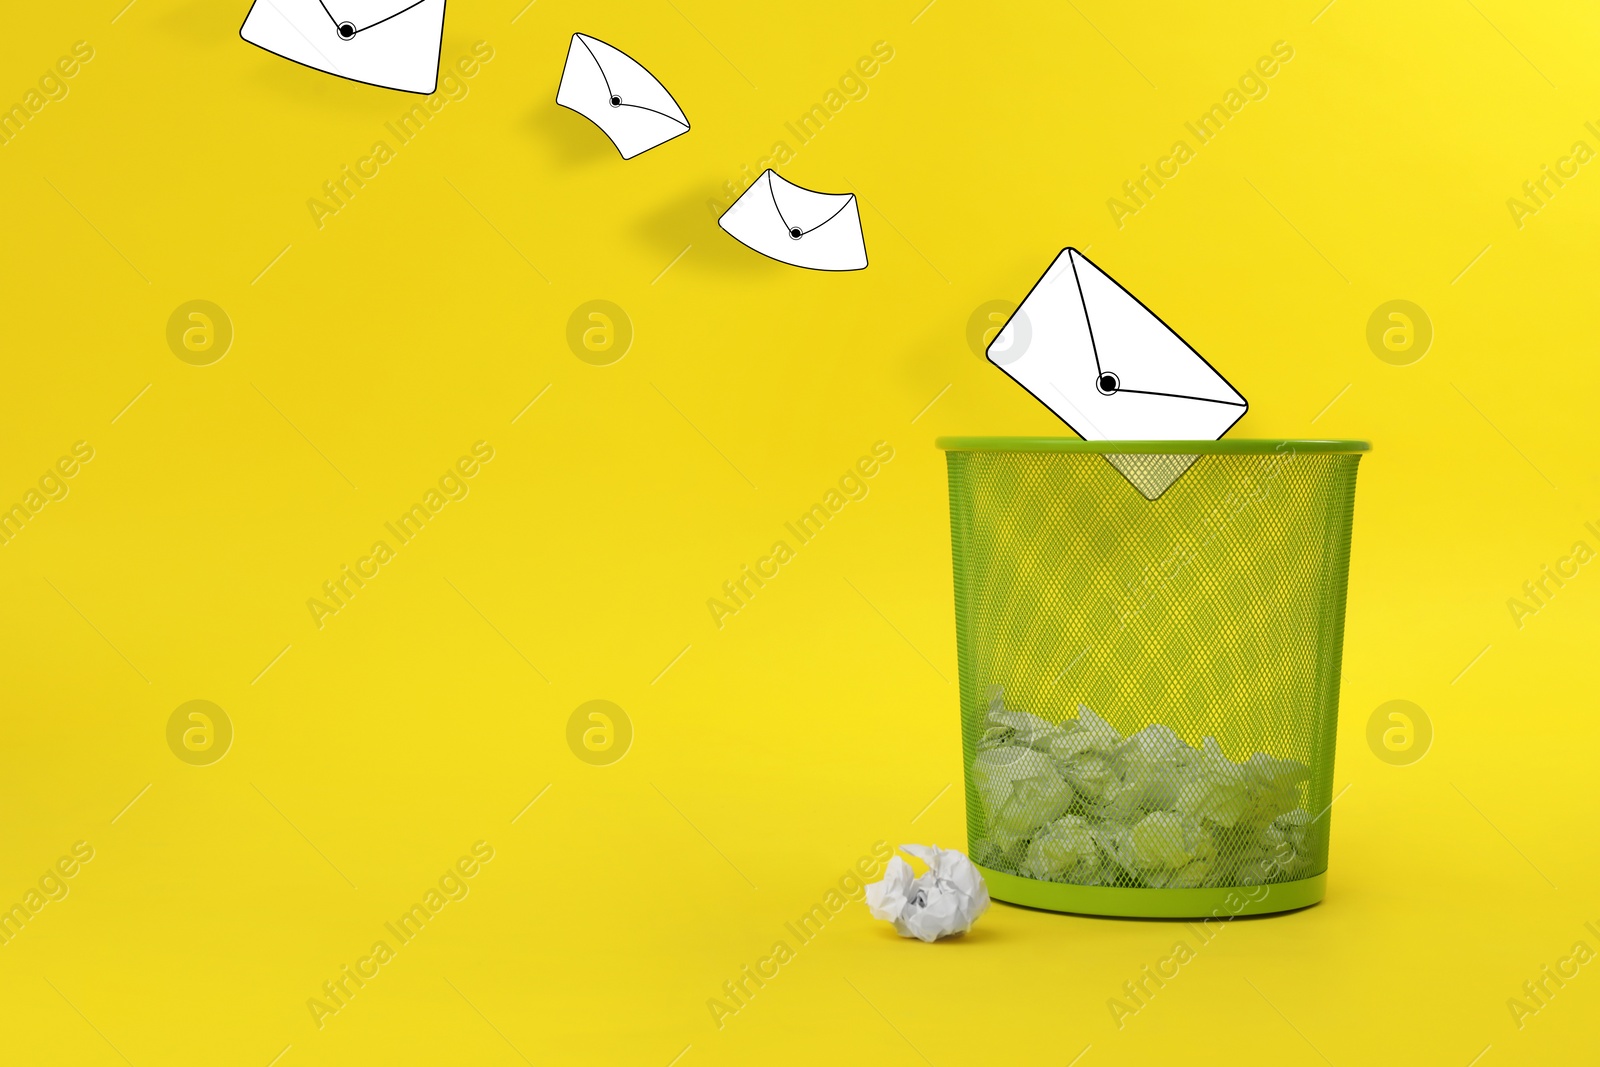 Image of Spam. Drawn envelopes falling into bin with crumpled paper on yellow background